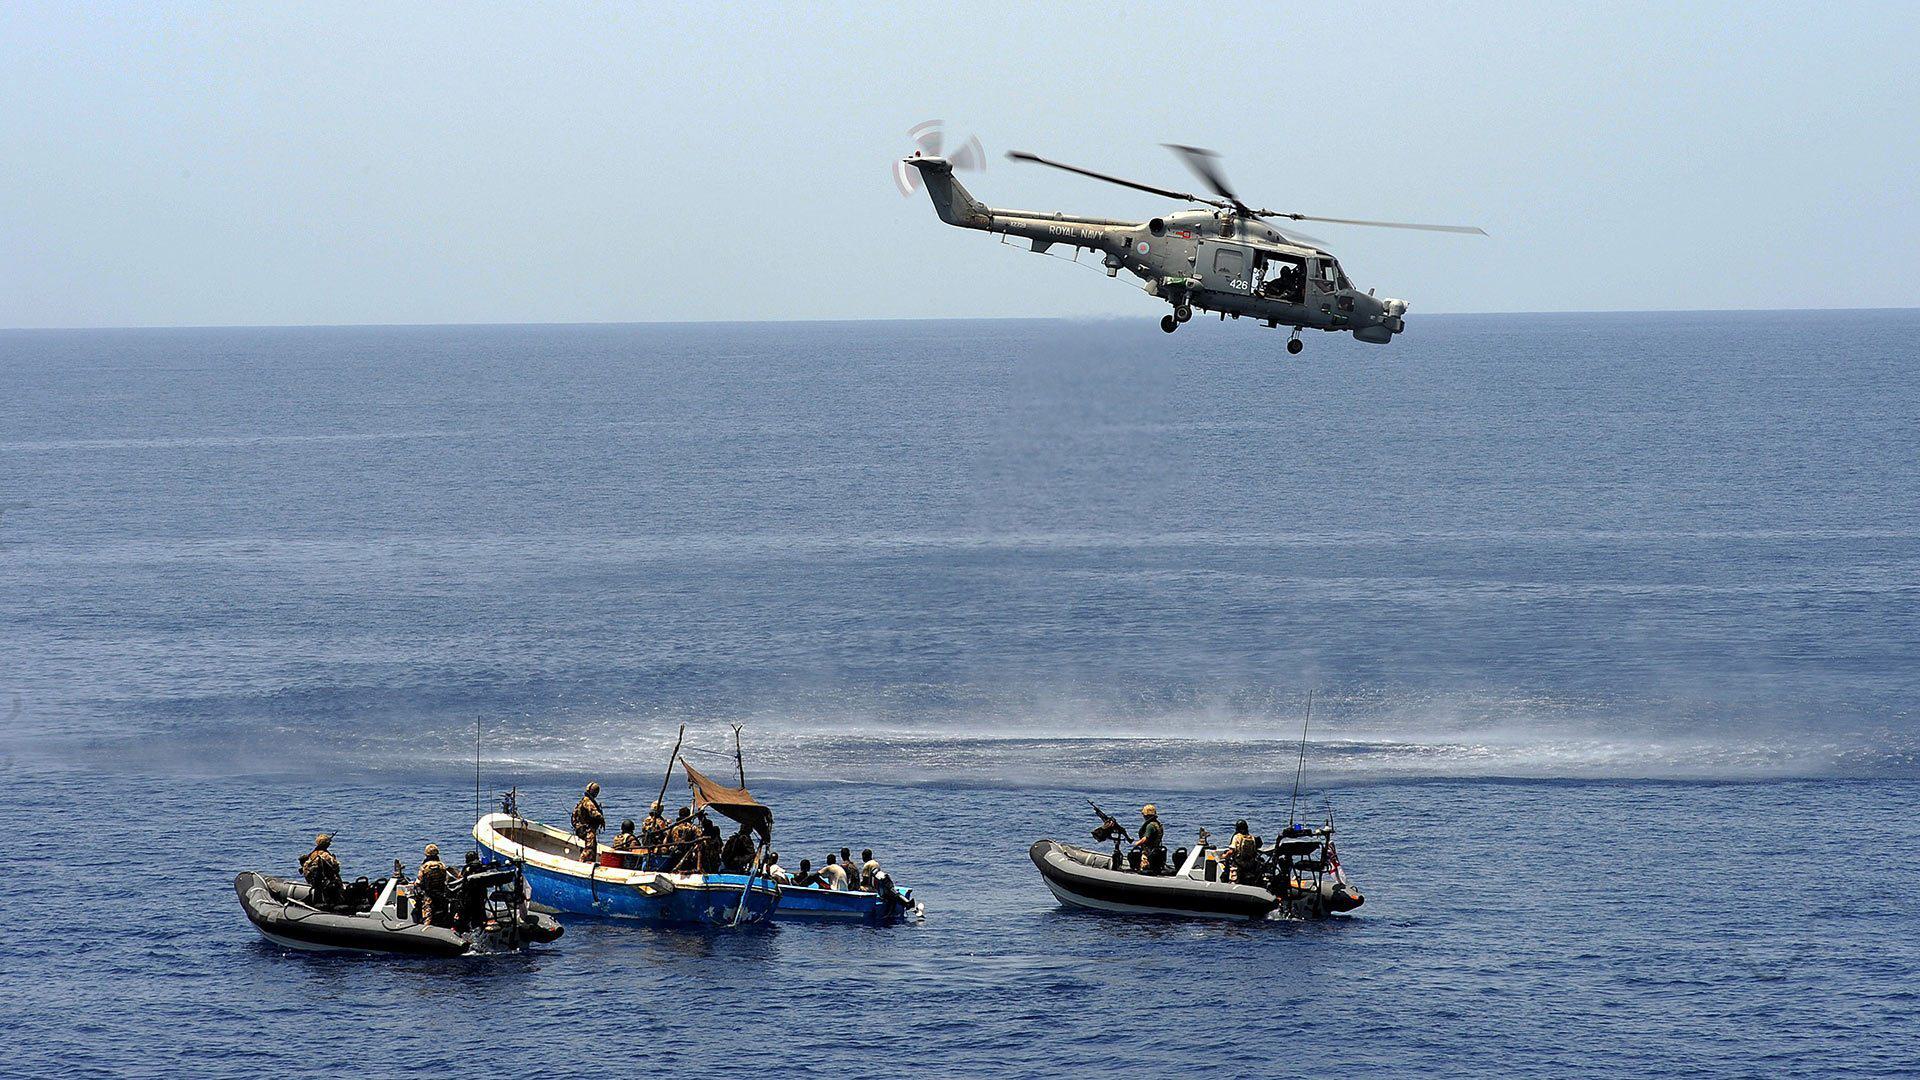 Royal Navy troops intercept two suspicious skiffs during anti-piracy operation in the Gulf of Aden near Somalia. A UMD study shows that rising ocean temperatures and falling fish populations in the area causes more crime at sea.